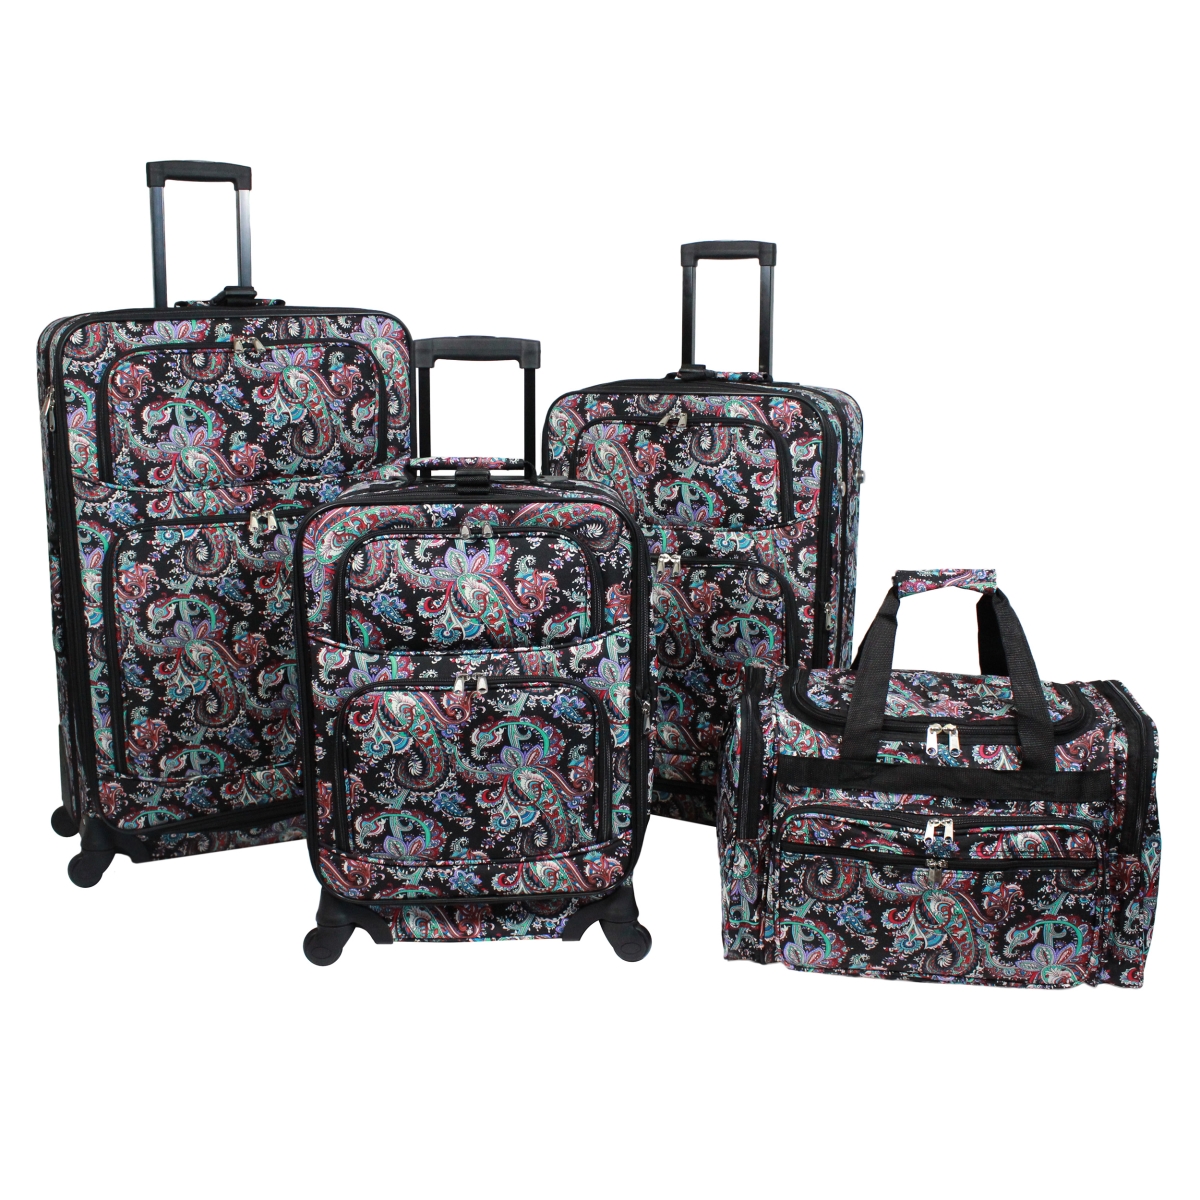 818703-t19-207 4 Piece Rolling Expandable Spinner Luggage Set - Paisley